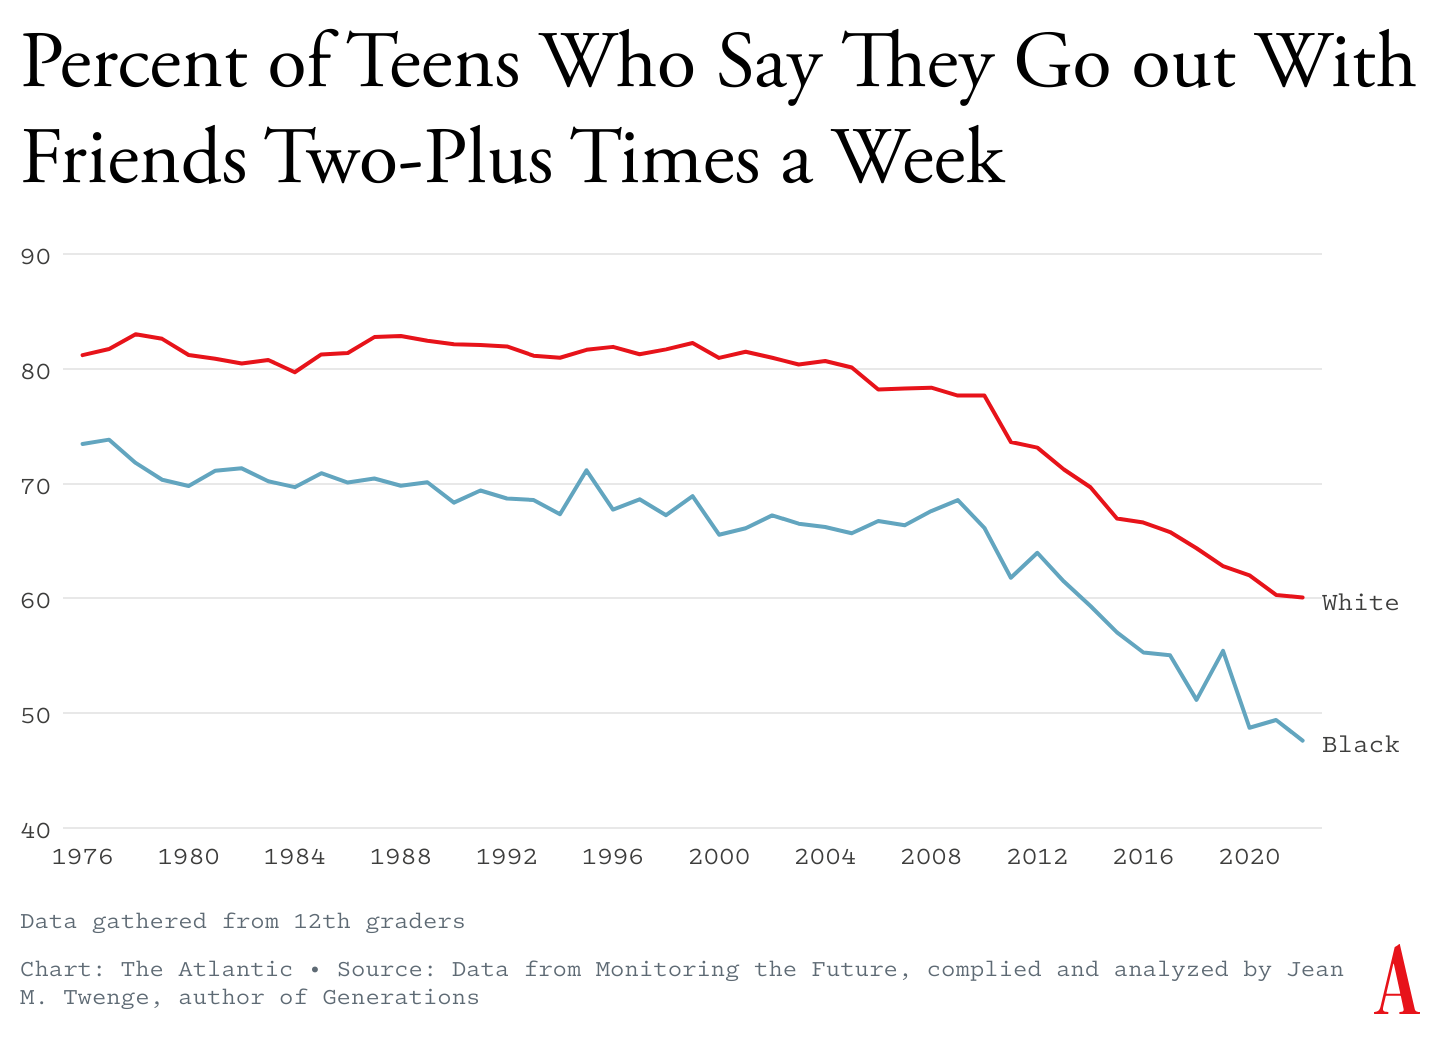 Graph showing downward trend in percent of teens who says they go out with friends twice a week or more.